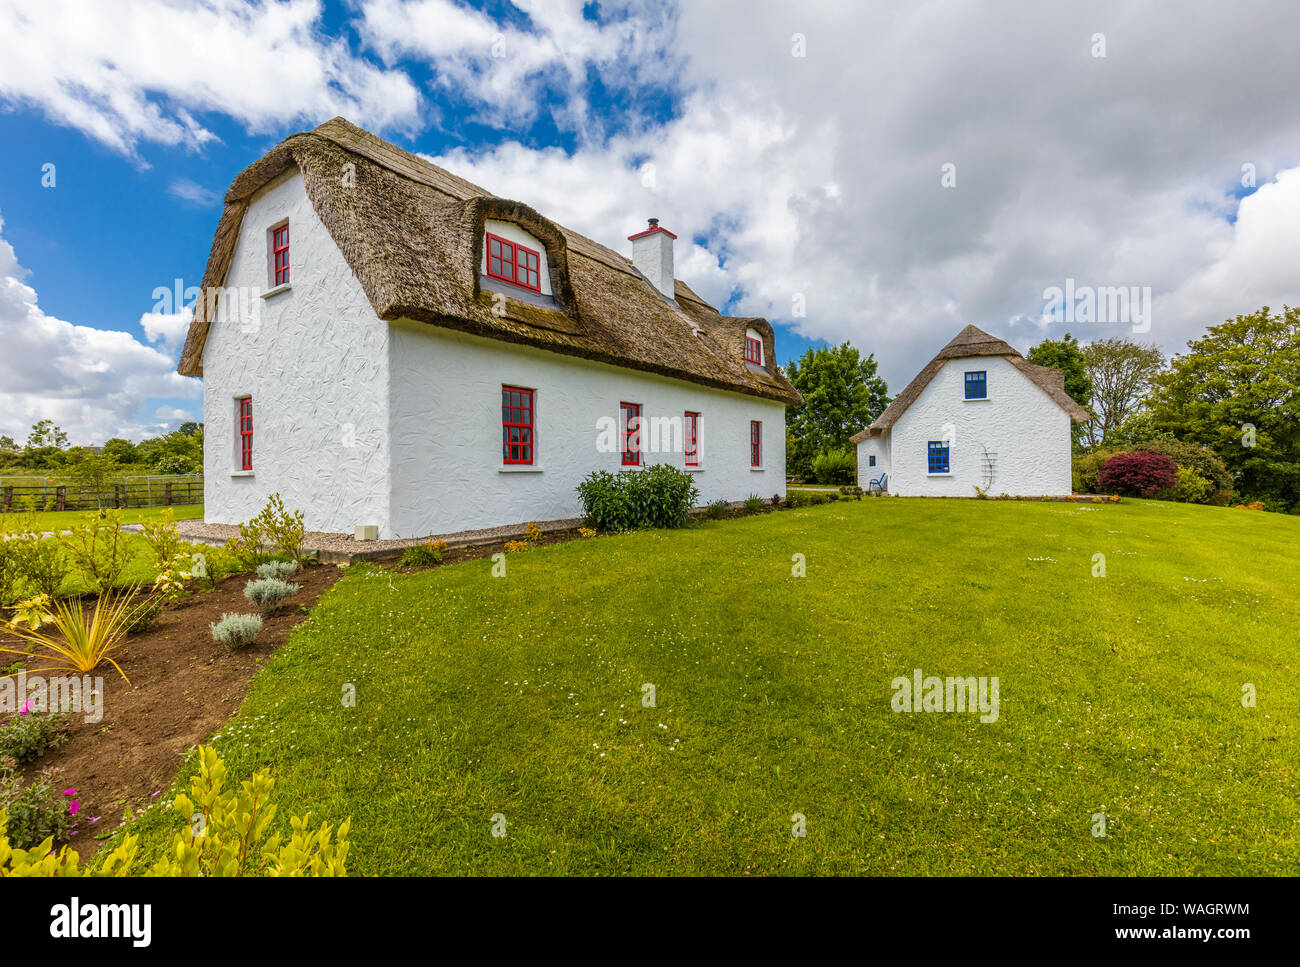 Thatched roof cottages in Kinvara in County Galway Ireland Stock Photo